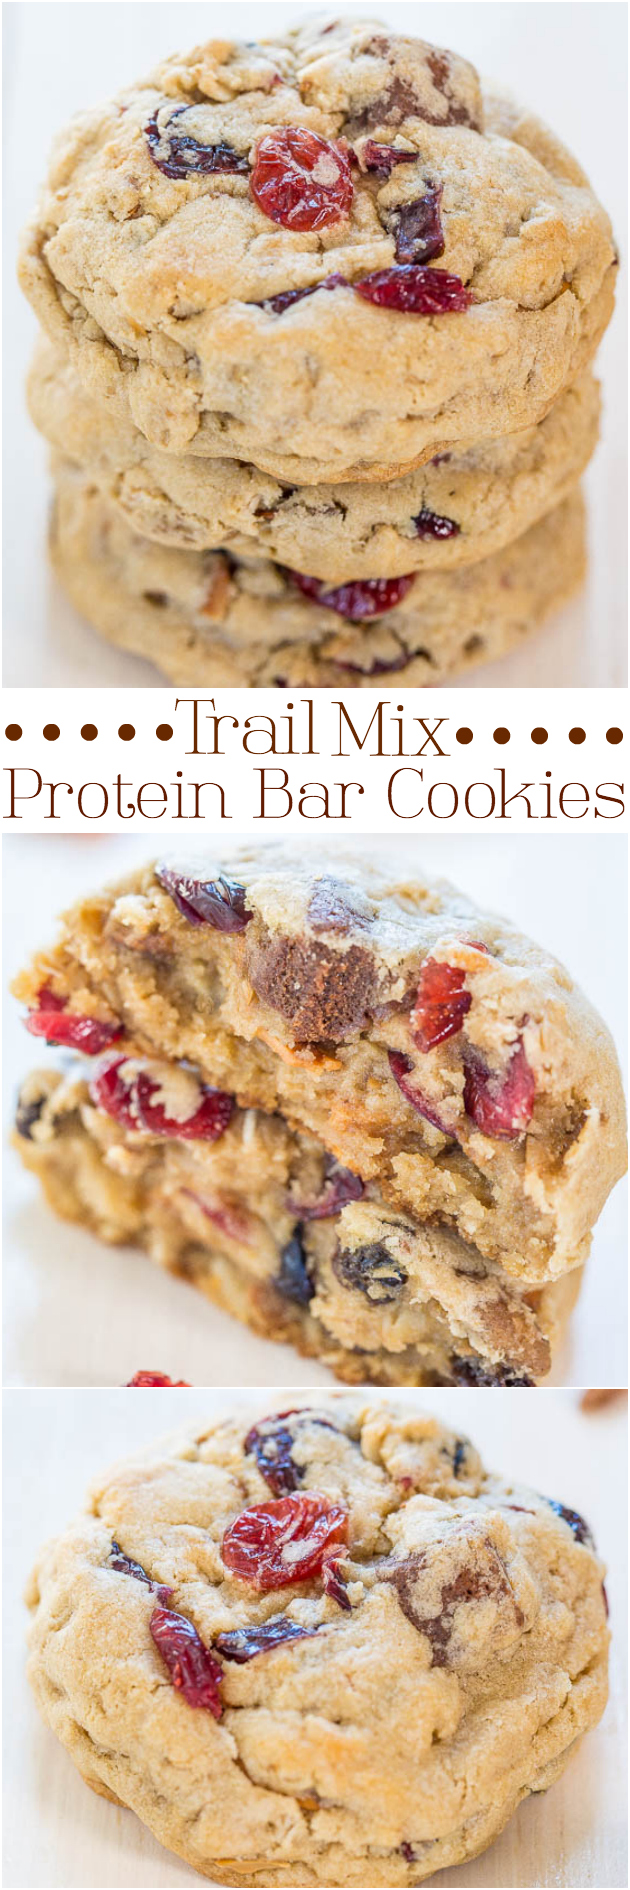 Trail Mix Protein Bar Cookies - Packed with your favorite trail mix goodies, even protein bars!! Soft, chewy, and accidentally healthy!!!